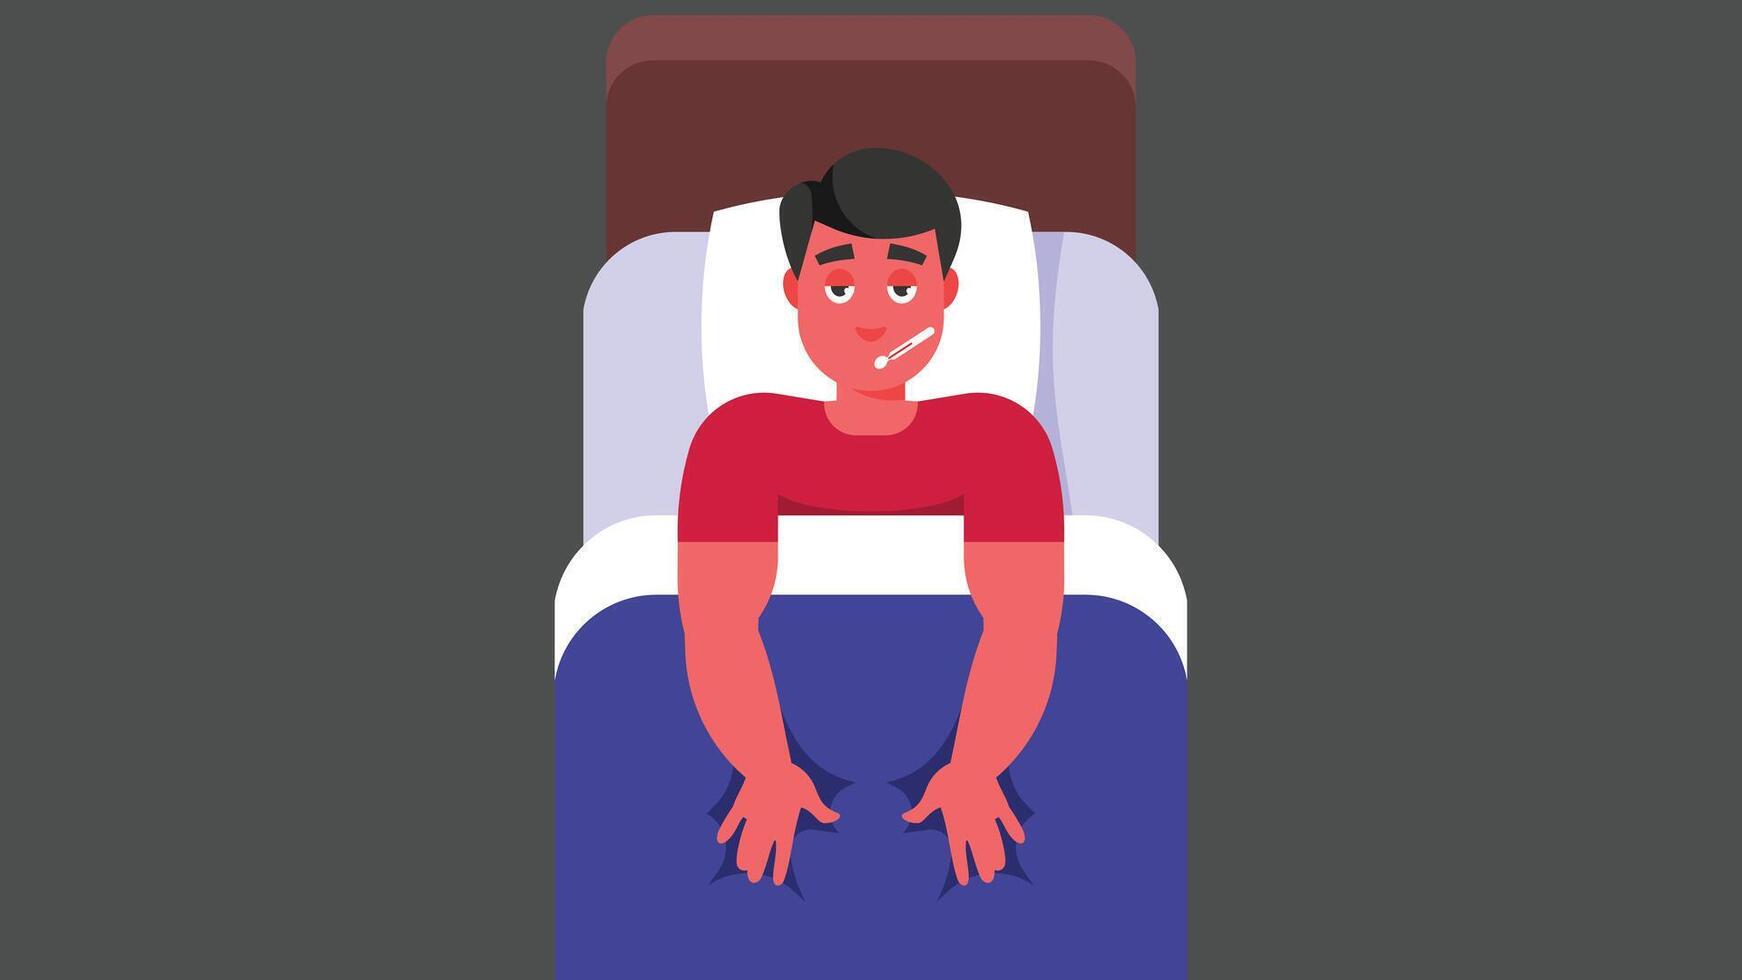 boy has fever and sleeping in the bed ilustration vector